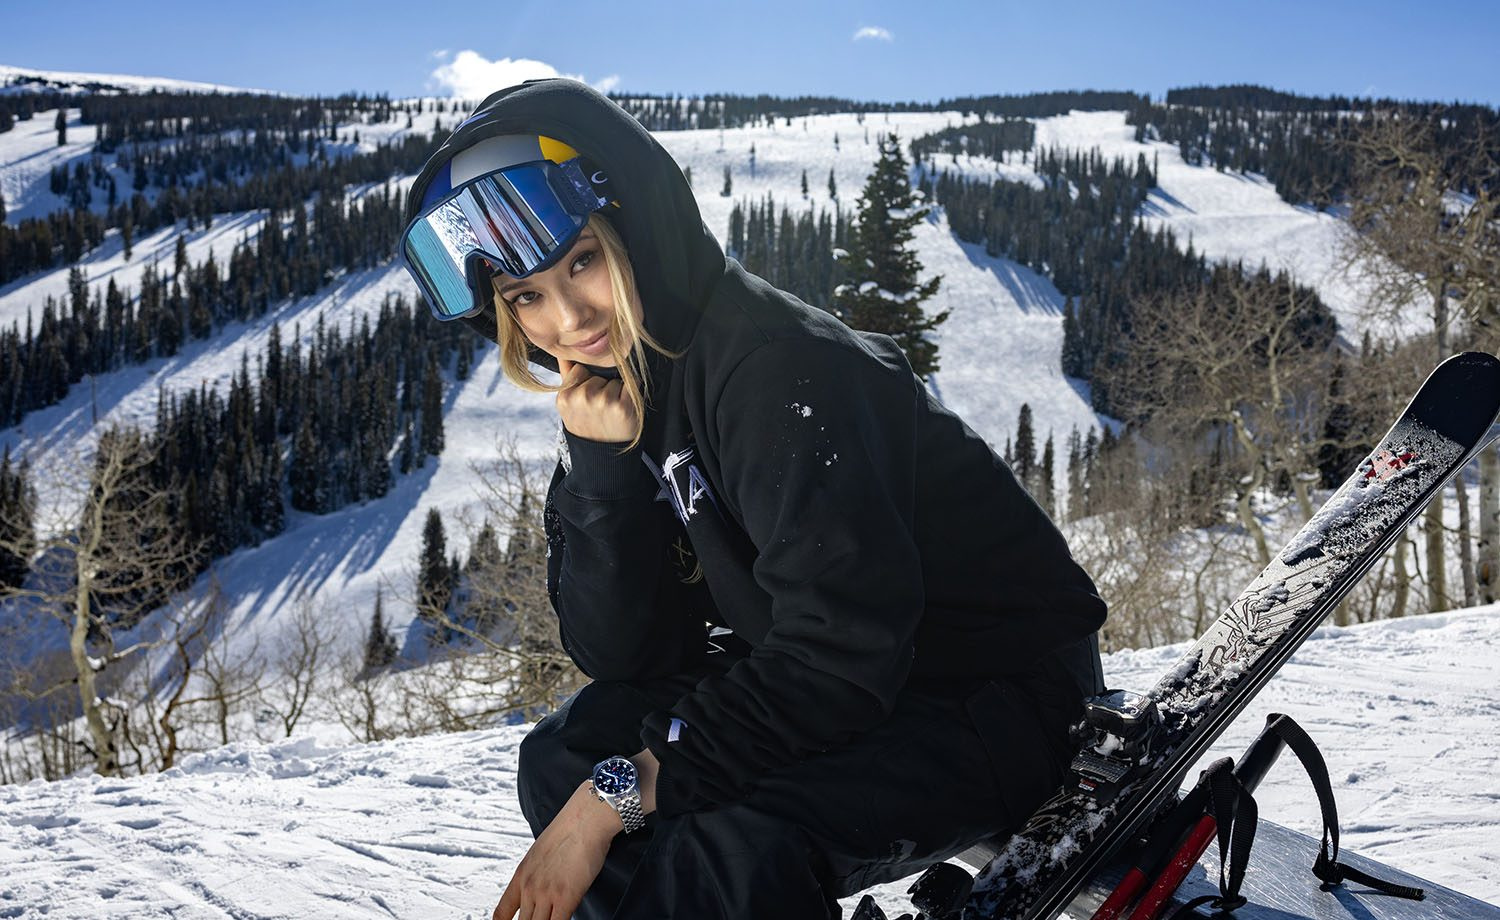 IWC - FREESTYLE SKIER EILEEN GU VISITS IWC AT WATCHES AND WONDERS